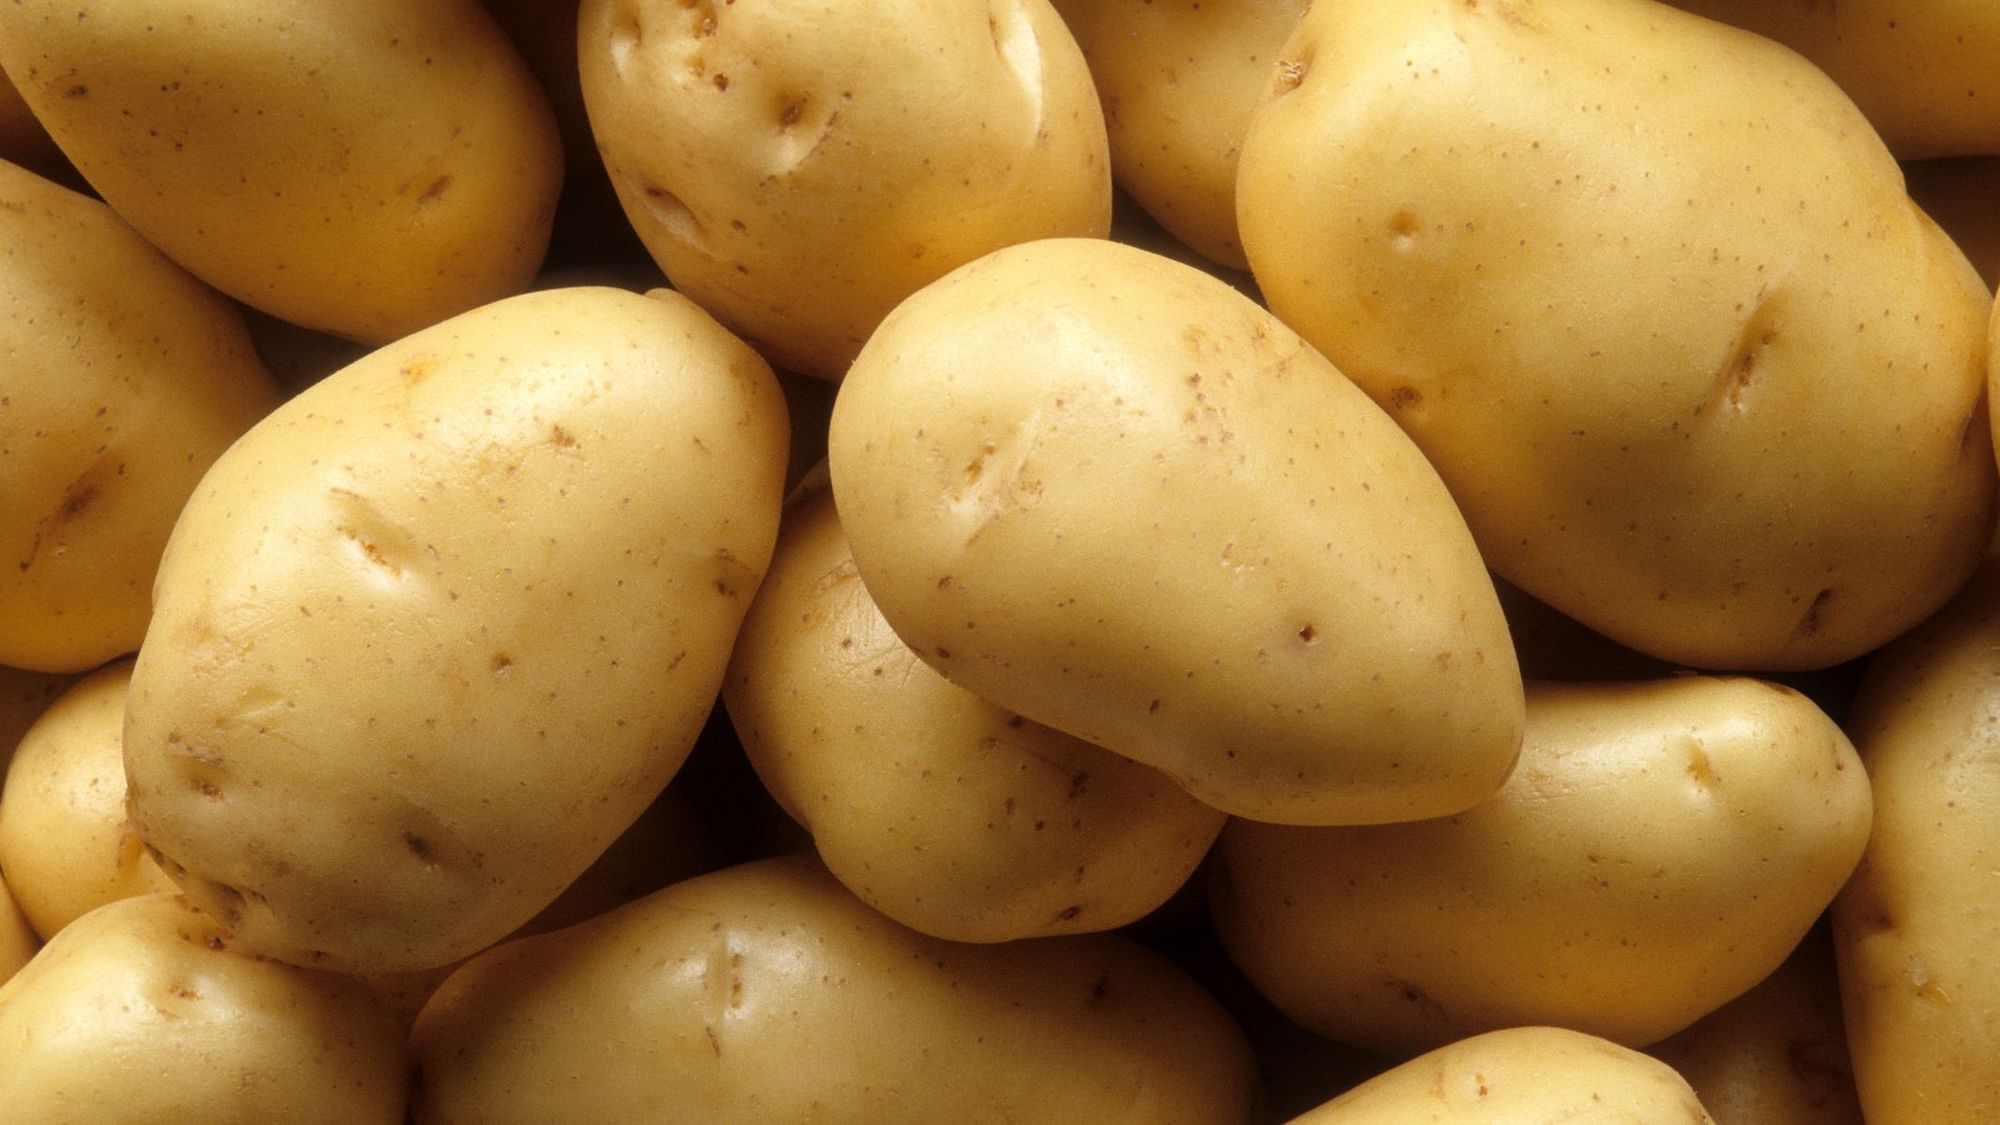 Study shows that consuming potatoes works just as well as carbohydrate gels to improve exercise performance.